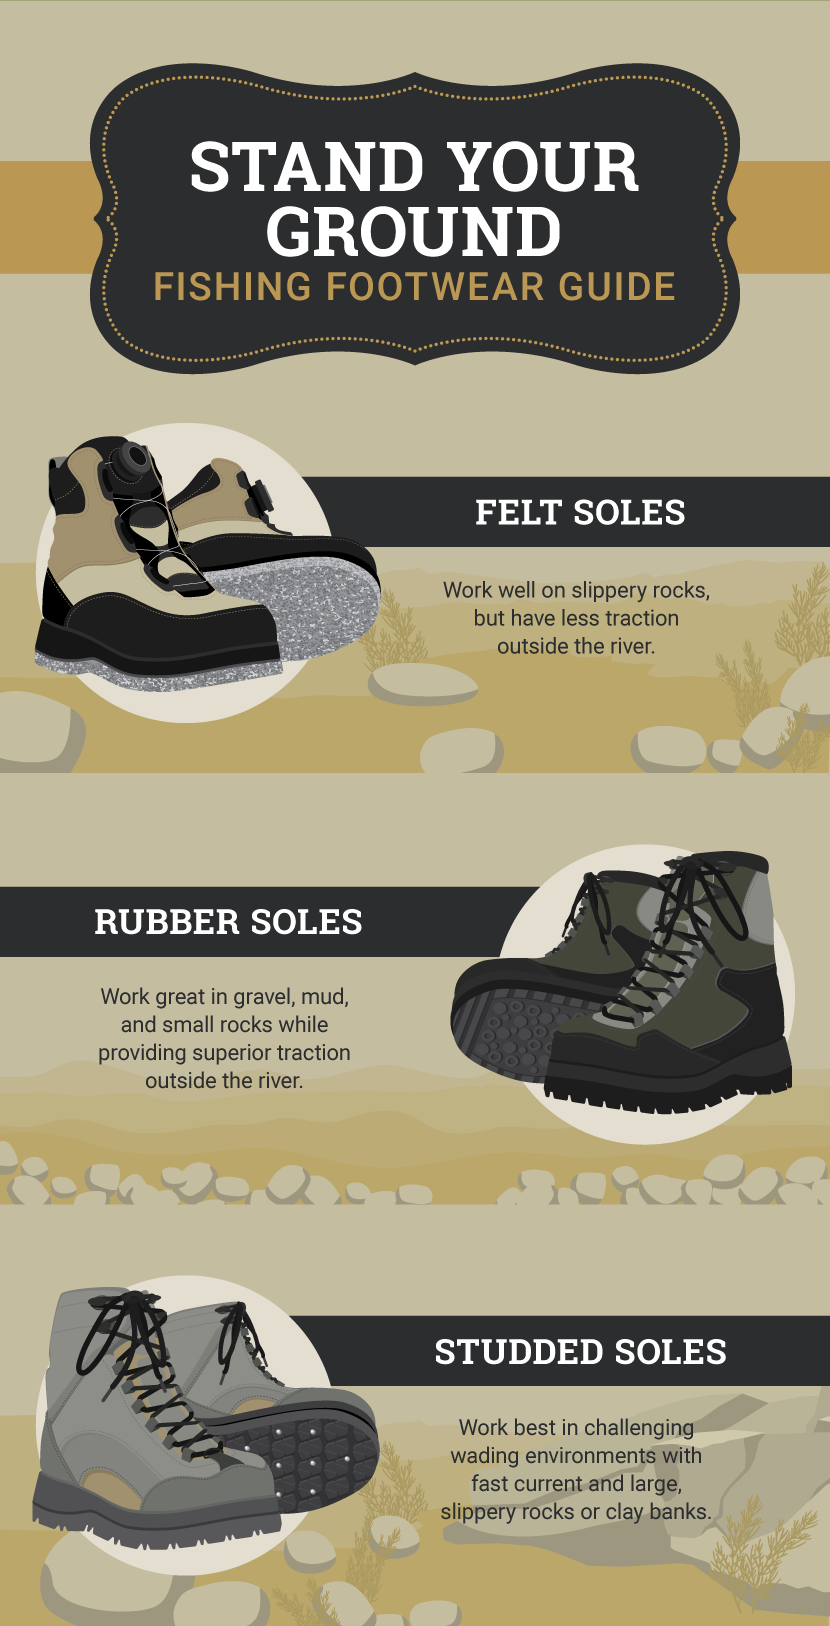 Wader Footwear - A Guide to Choosing the Right Fishing Waders